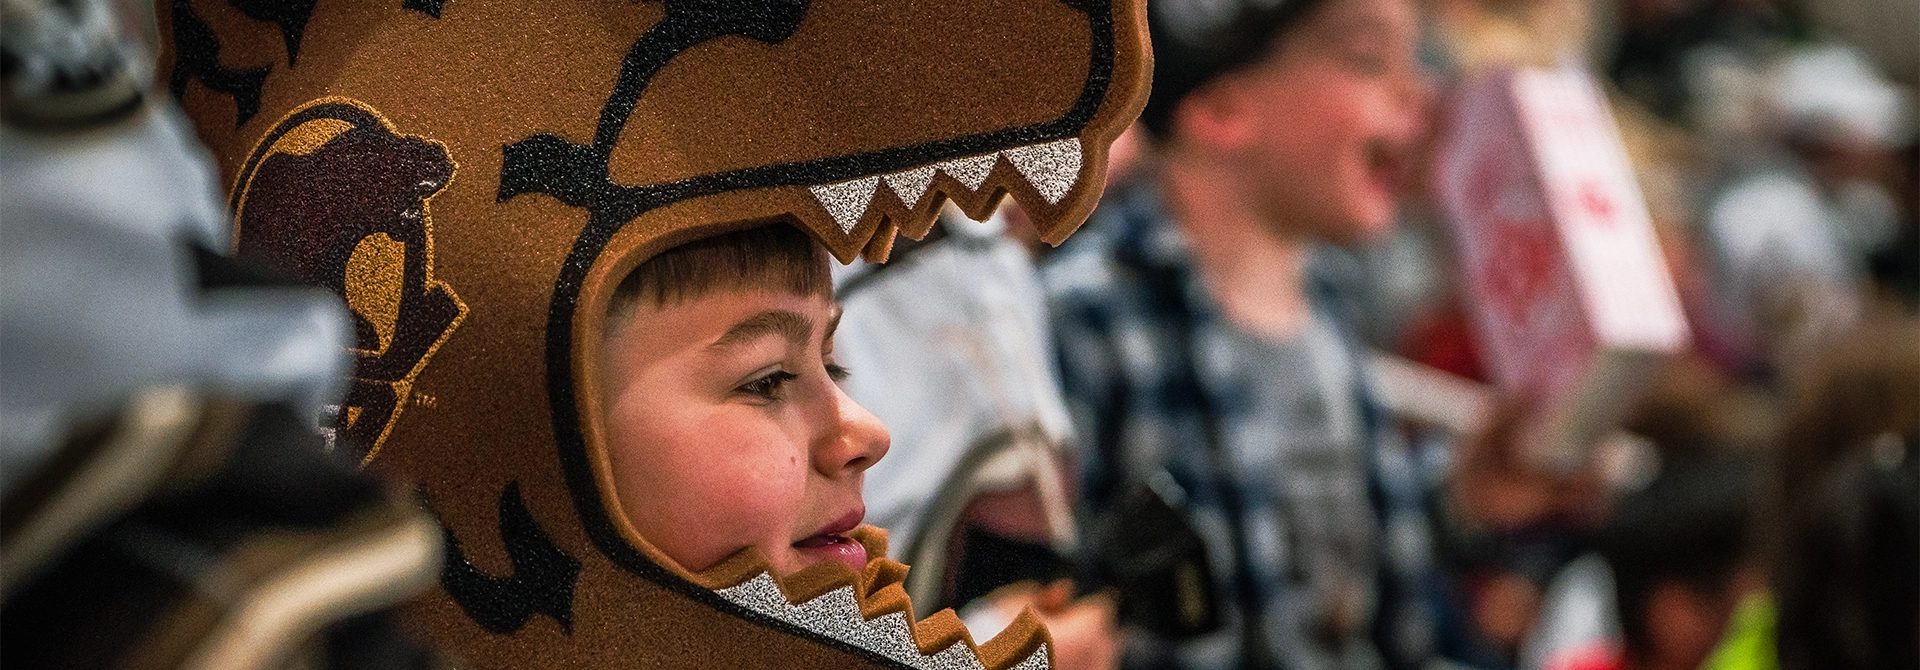 A child wearing a hershey bears hat